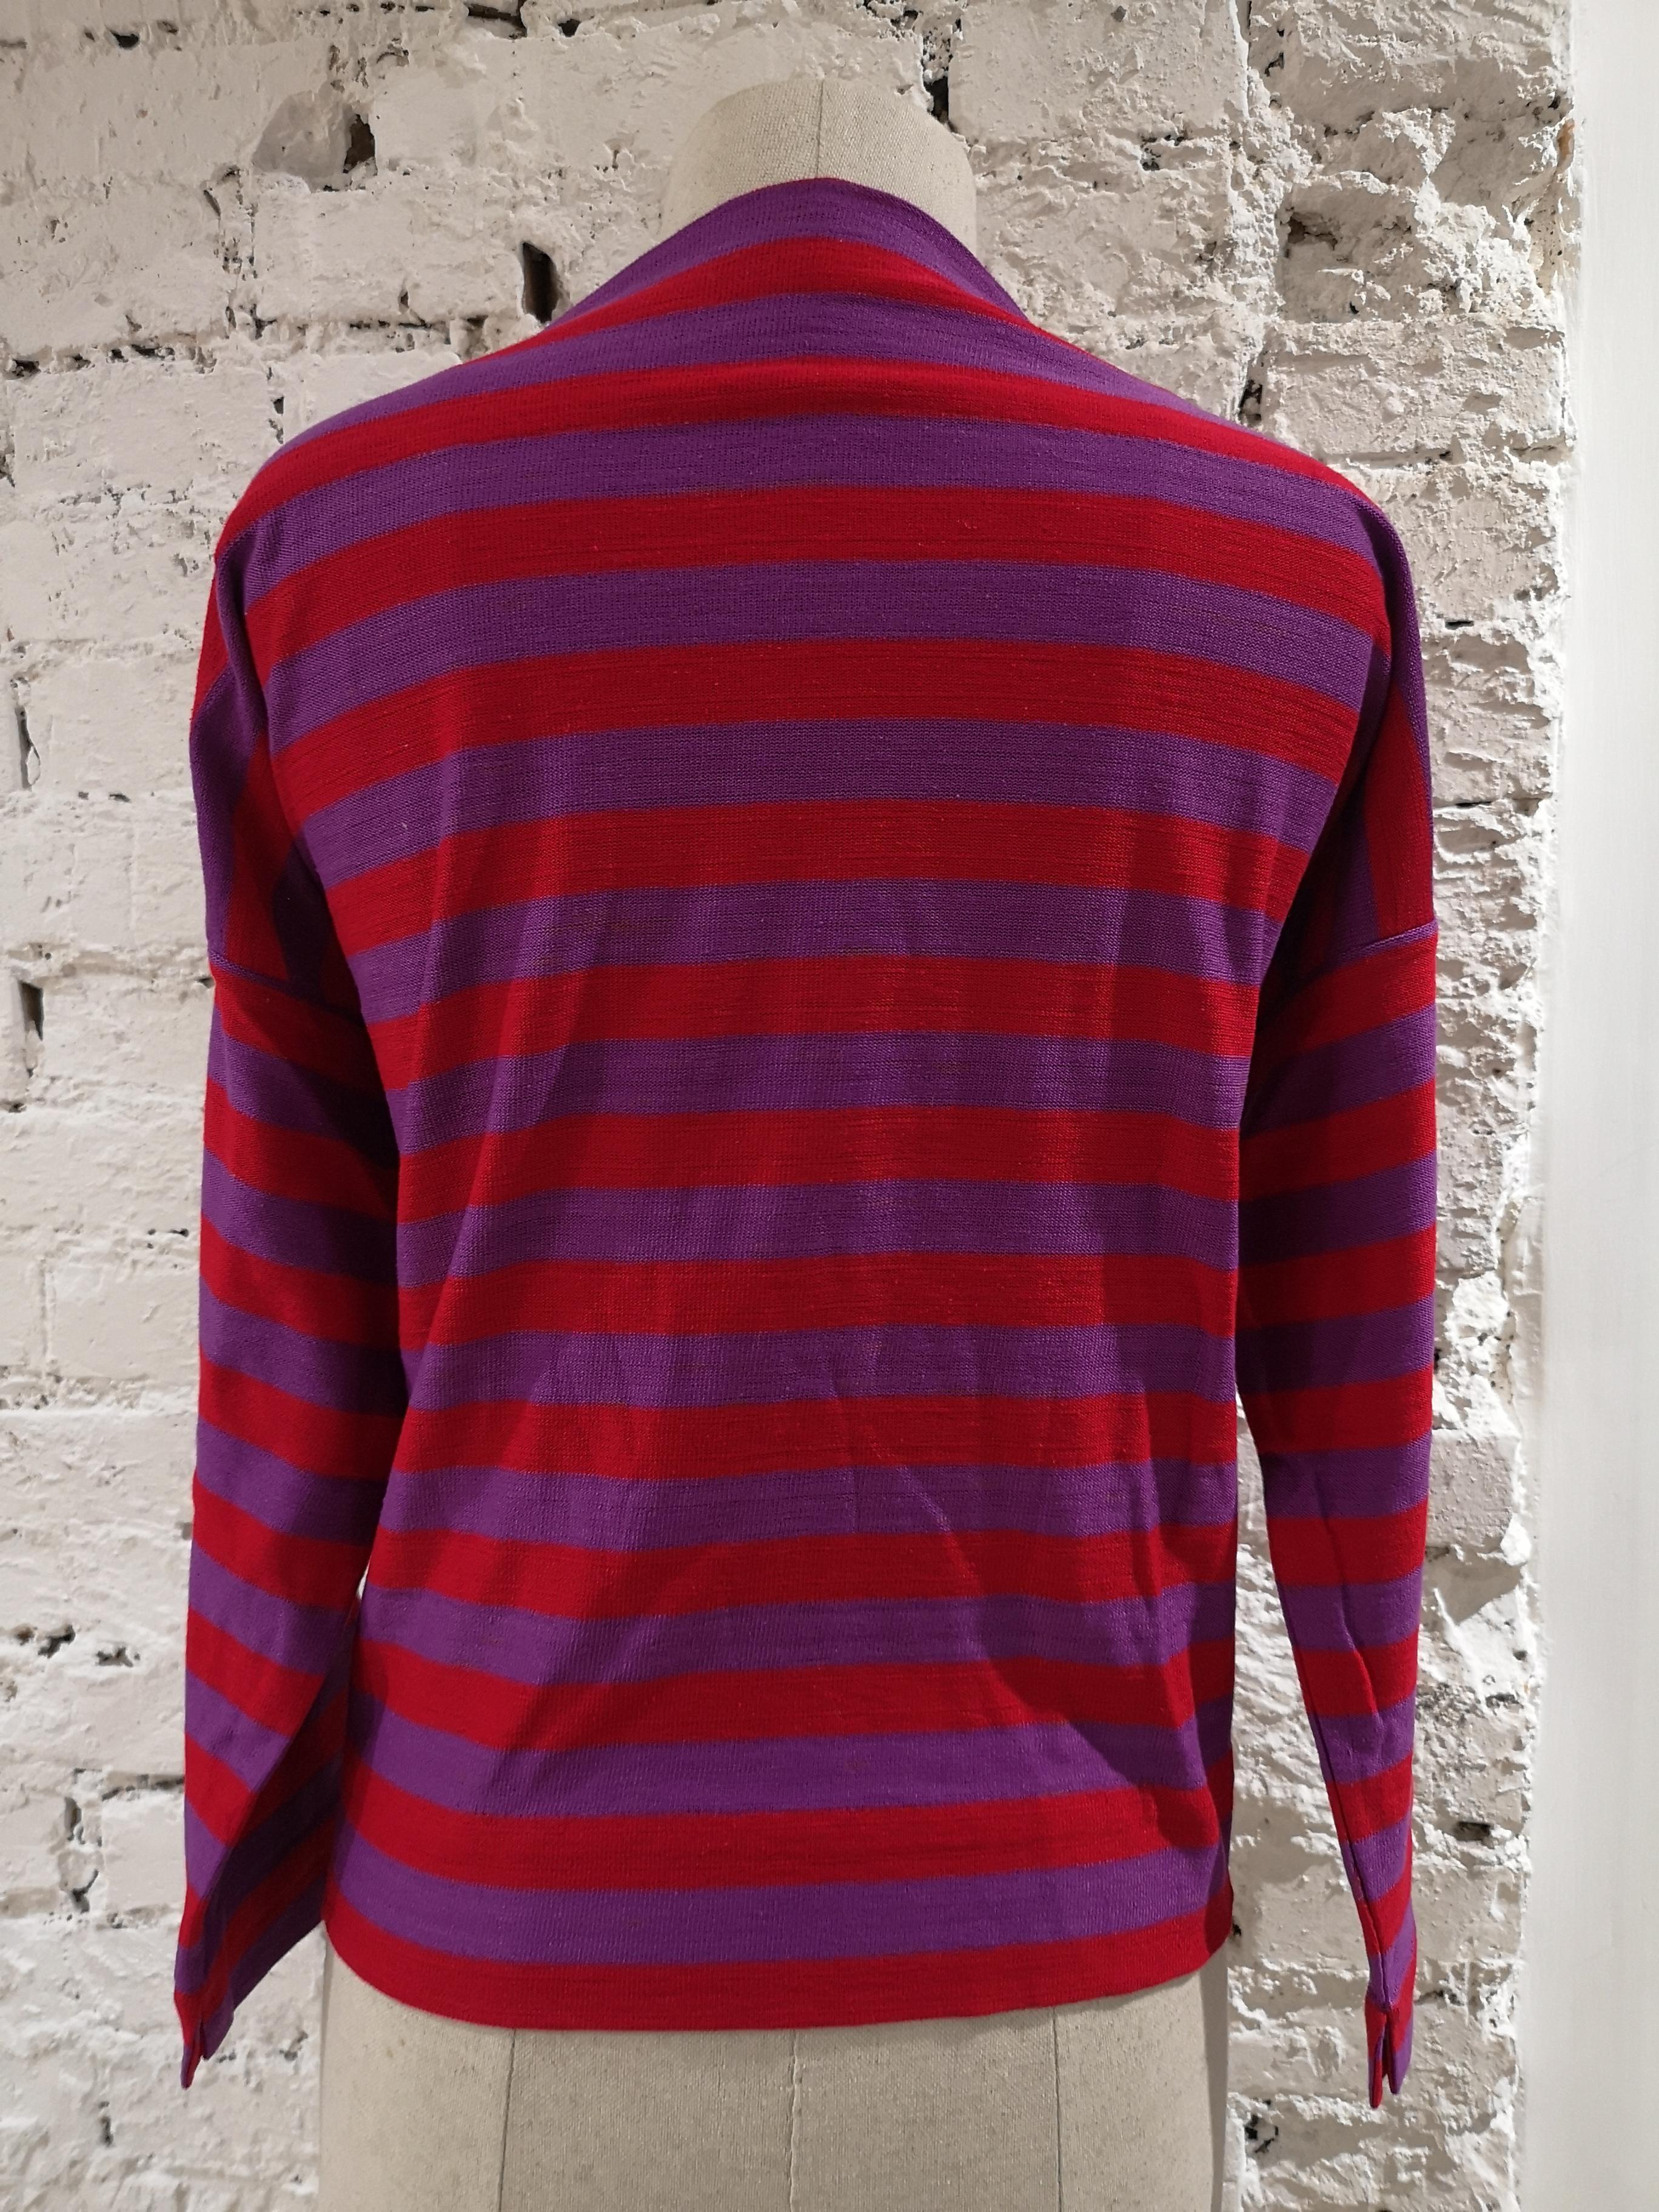 Women's Vintage red and purple stripes t-shirt sweater